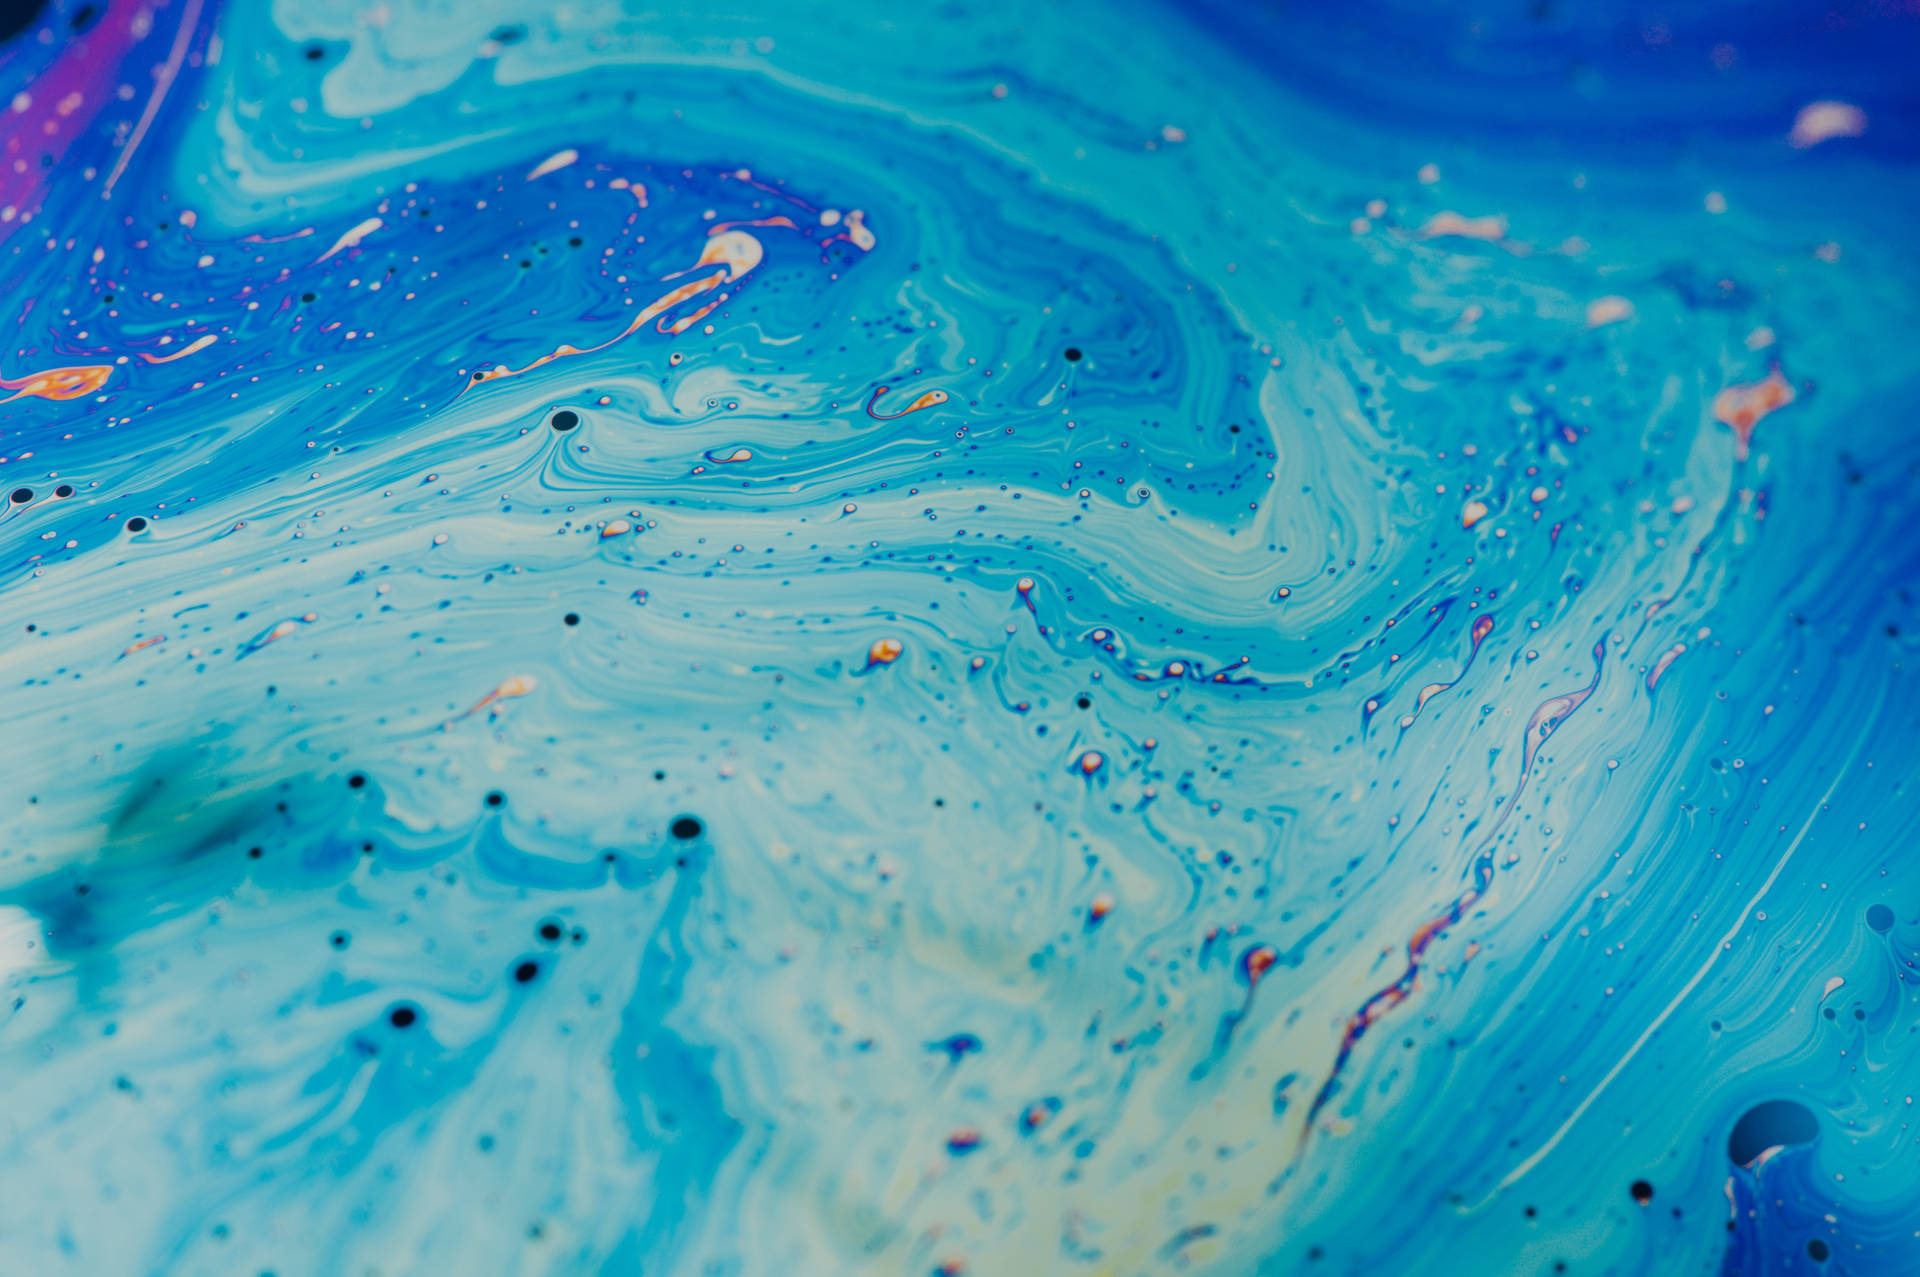 Blue Stains Art – A Masterpiece of Abstract Art Wallpaper